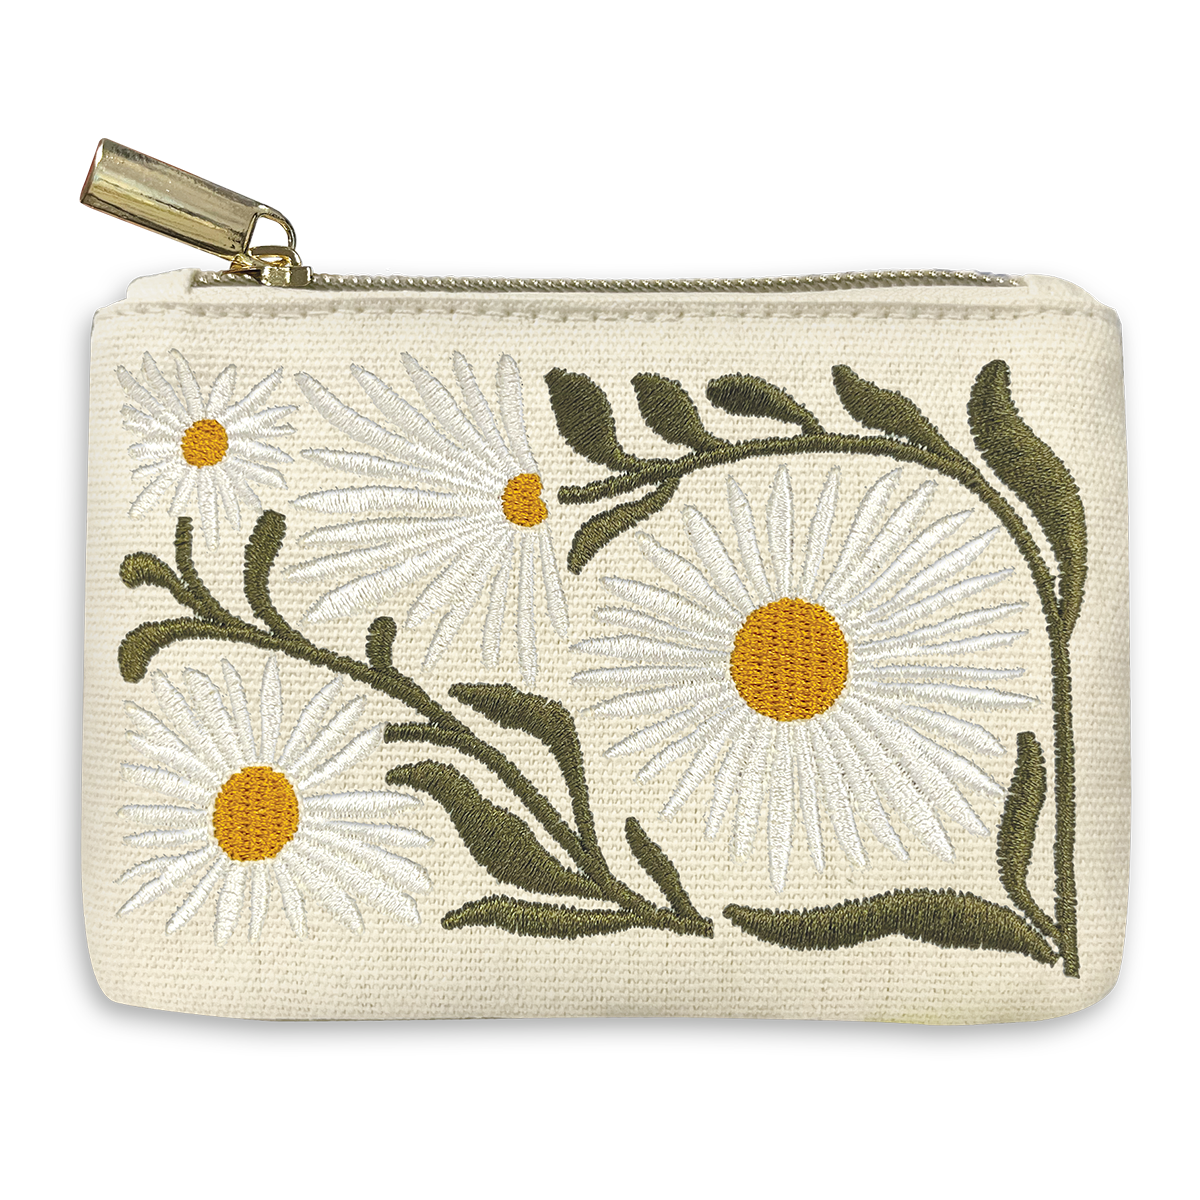 cream colored zipper bag with embroidered daisy design and gold zipper.